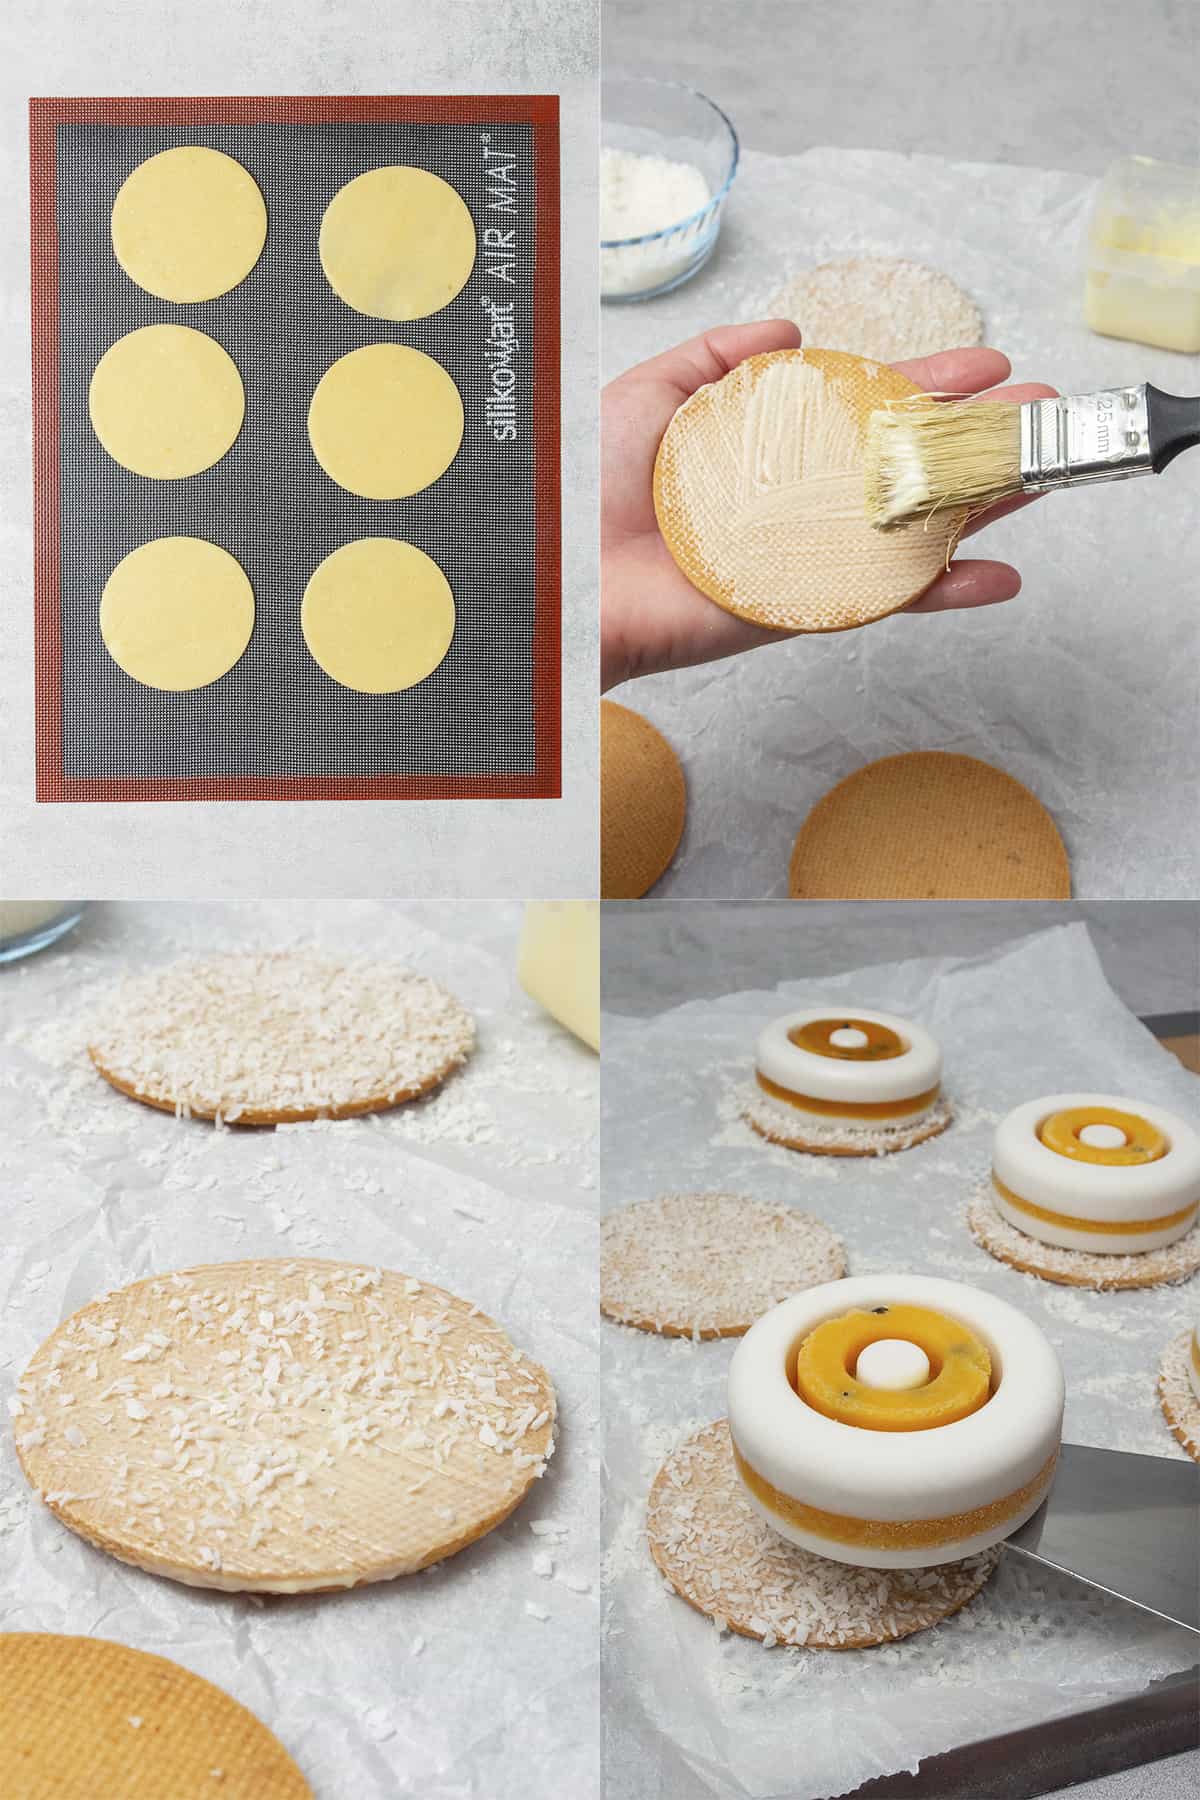 Assembly process of the pate sablee cookie.